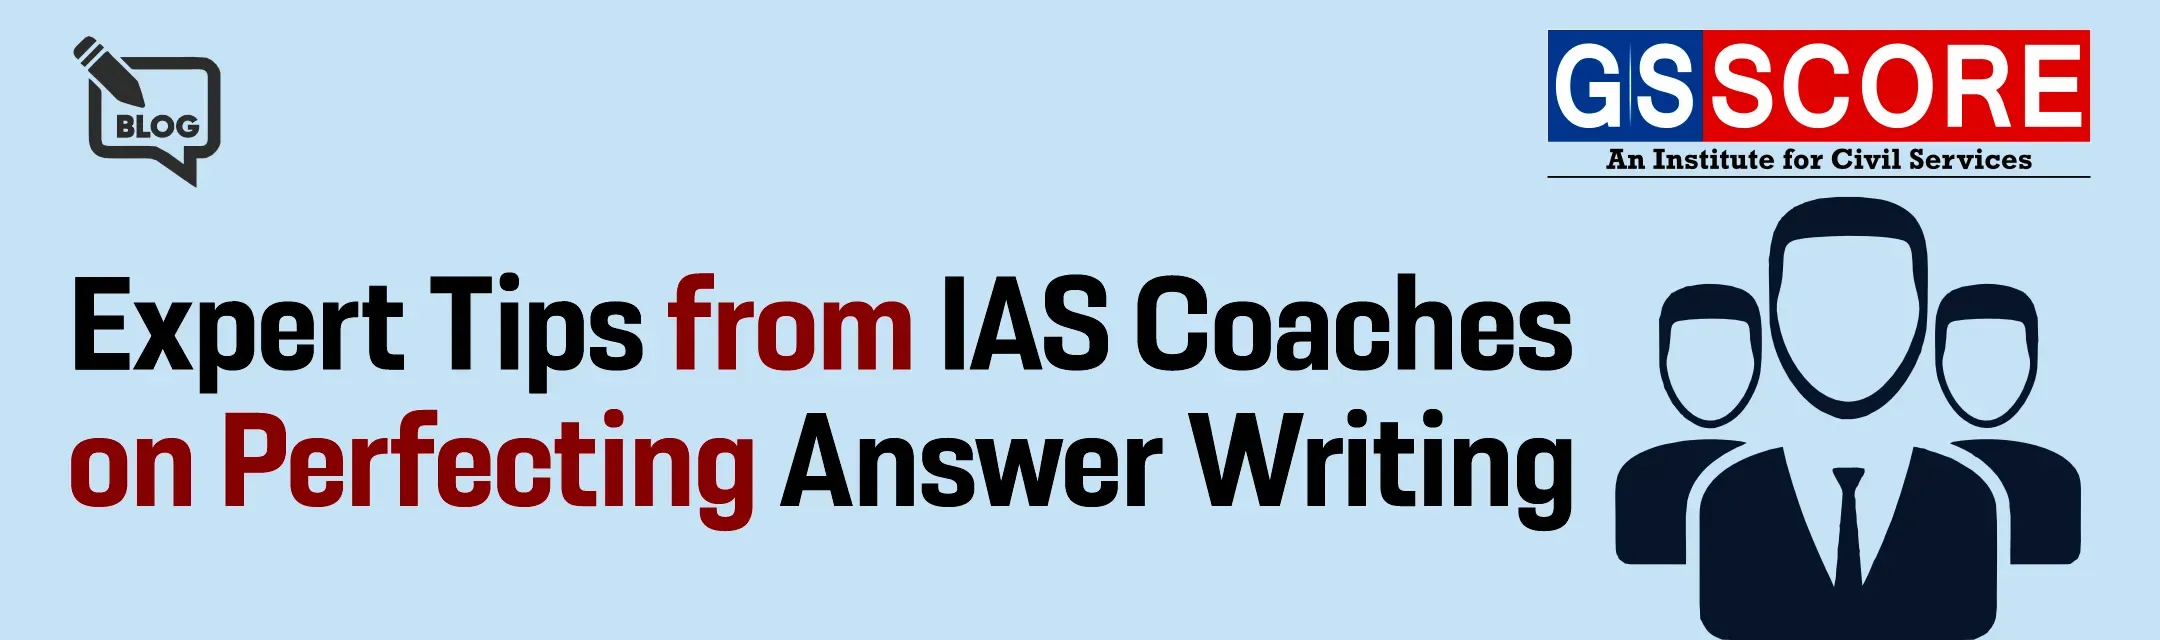 Expert Tips from IAS Coaches on Perfecting Answer Writing